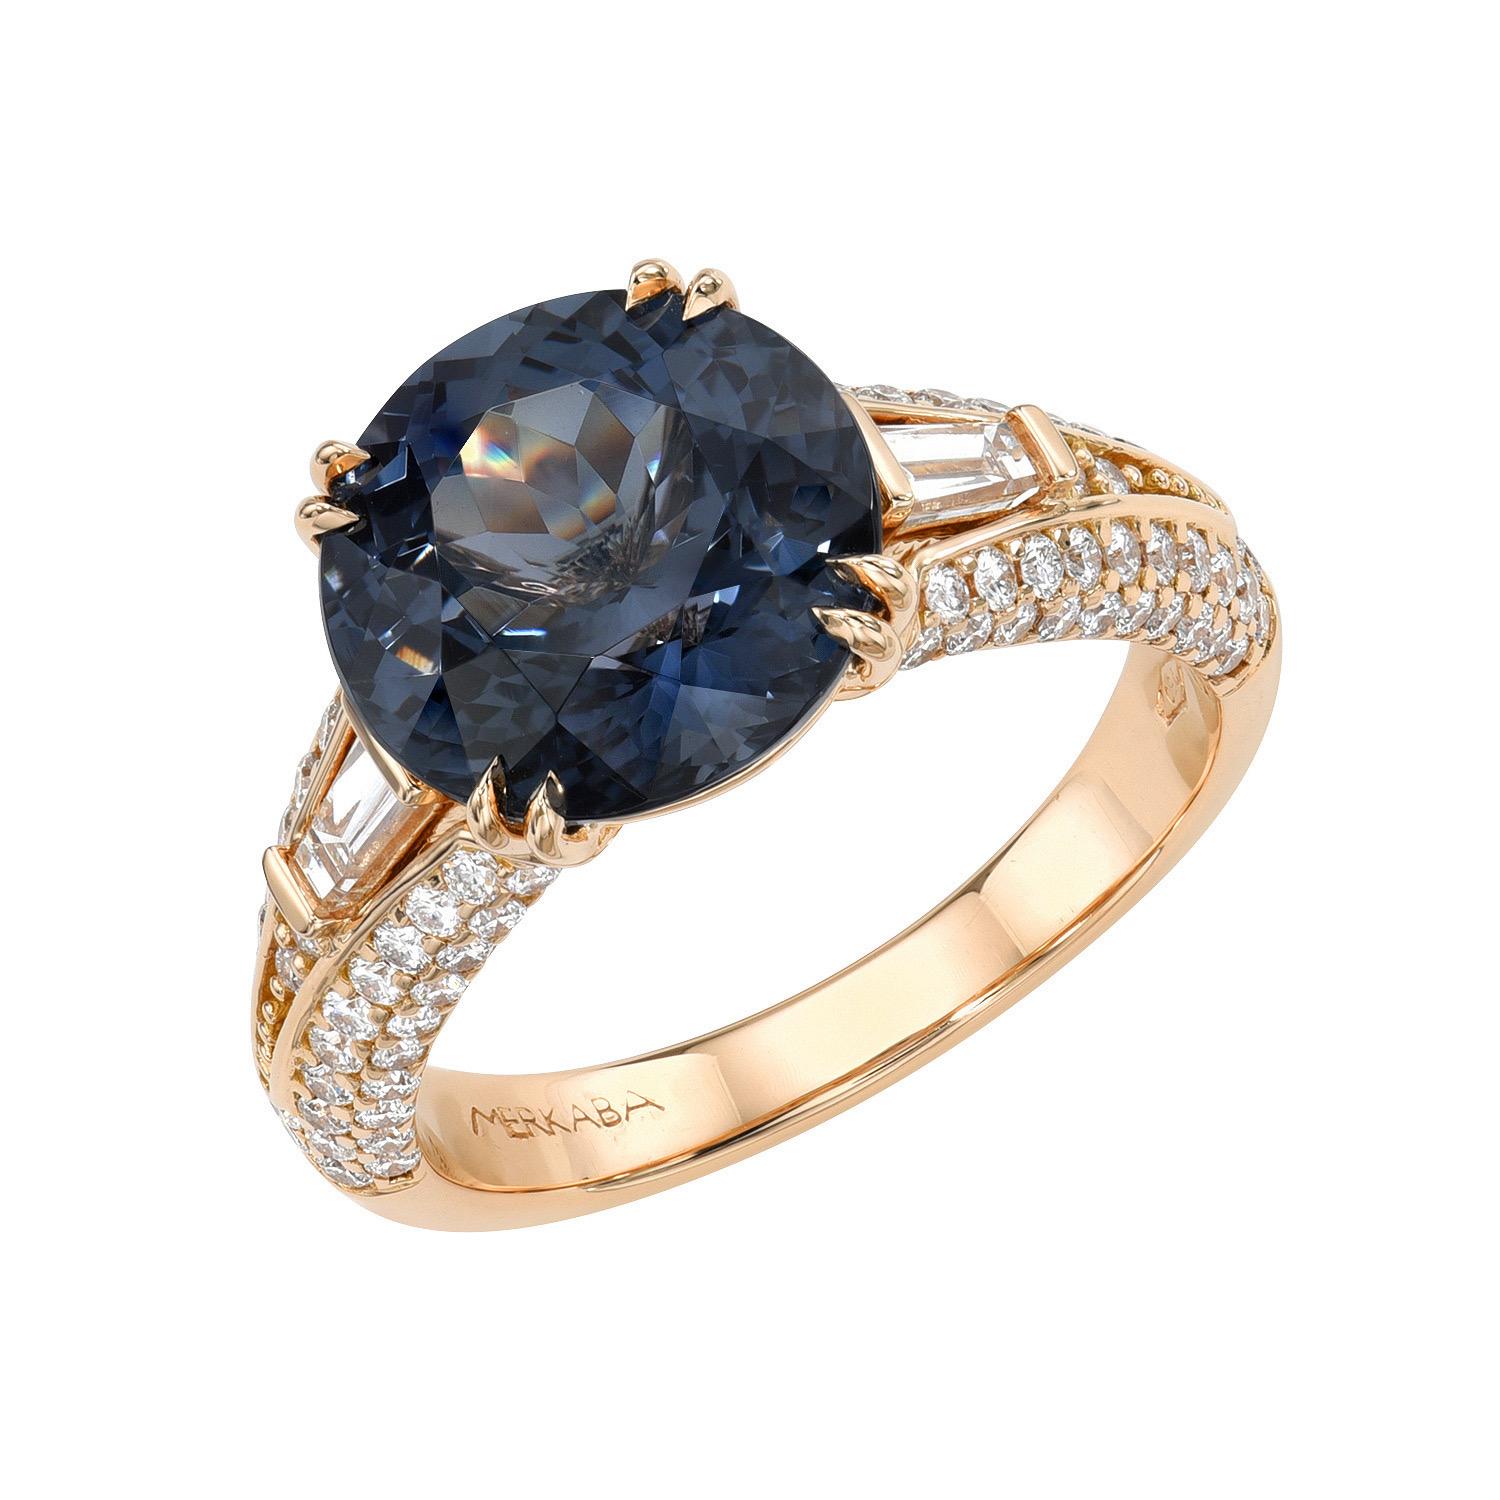 Extraordinary 5.30 carat Blue-Grey Spinel Round, 18K rose gold ring, decorated with a pair of 0.26 carat total baguette diamonds, and a total of 0.58 carat round brilliant diamonds.
Ring size 6.5. Resizing is complementary upon request.
Returns are